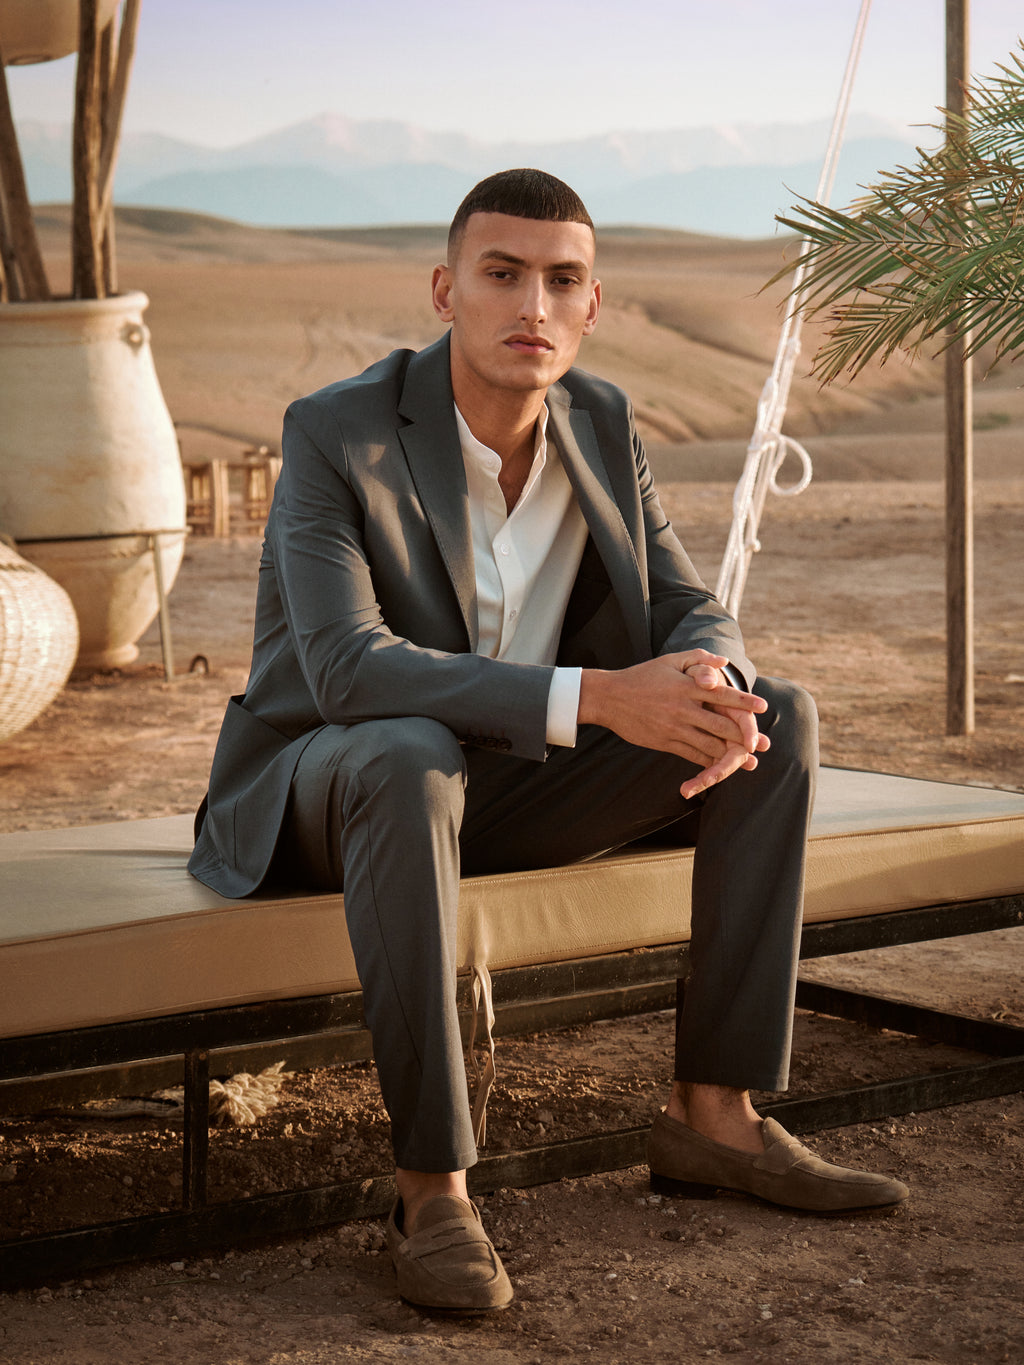 Male model wearing navy suit and white shirt sitting on a chair in the desert